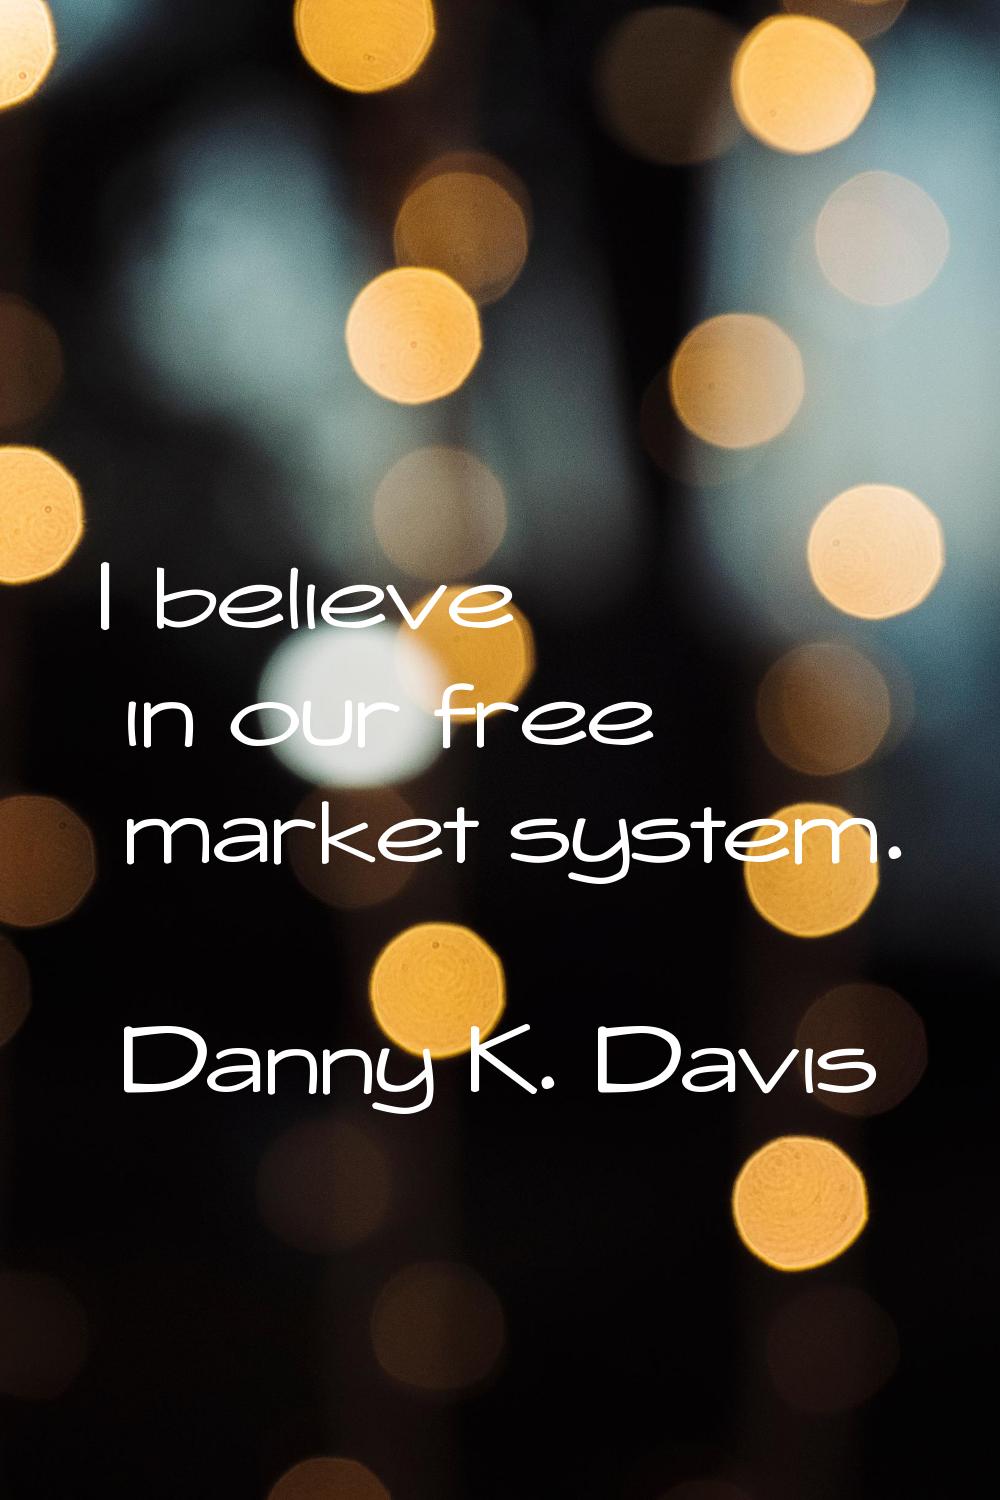 I believe in our free market system.